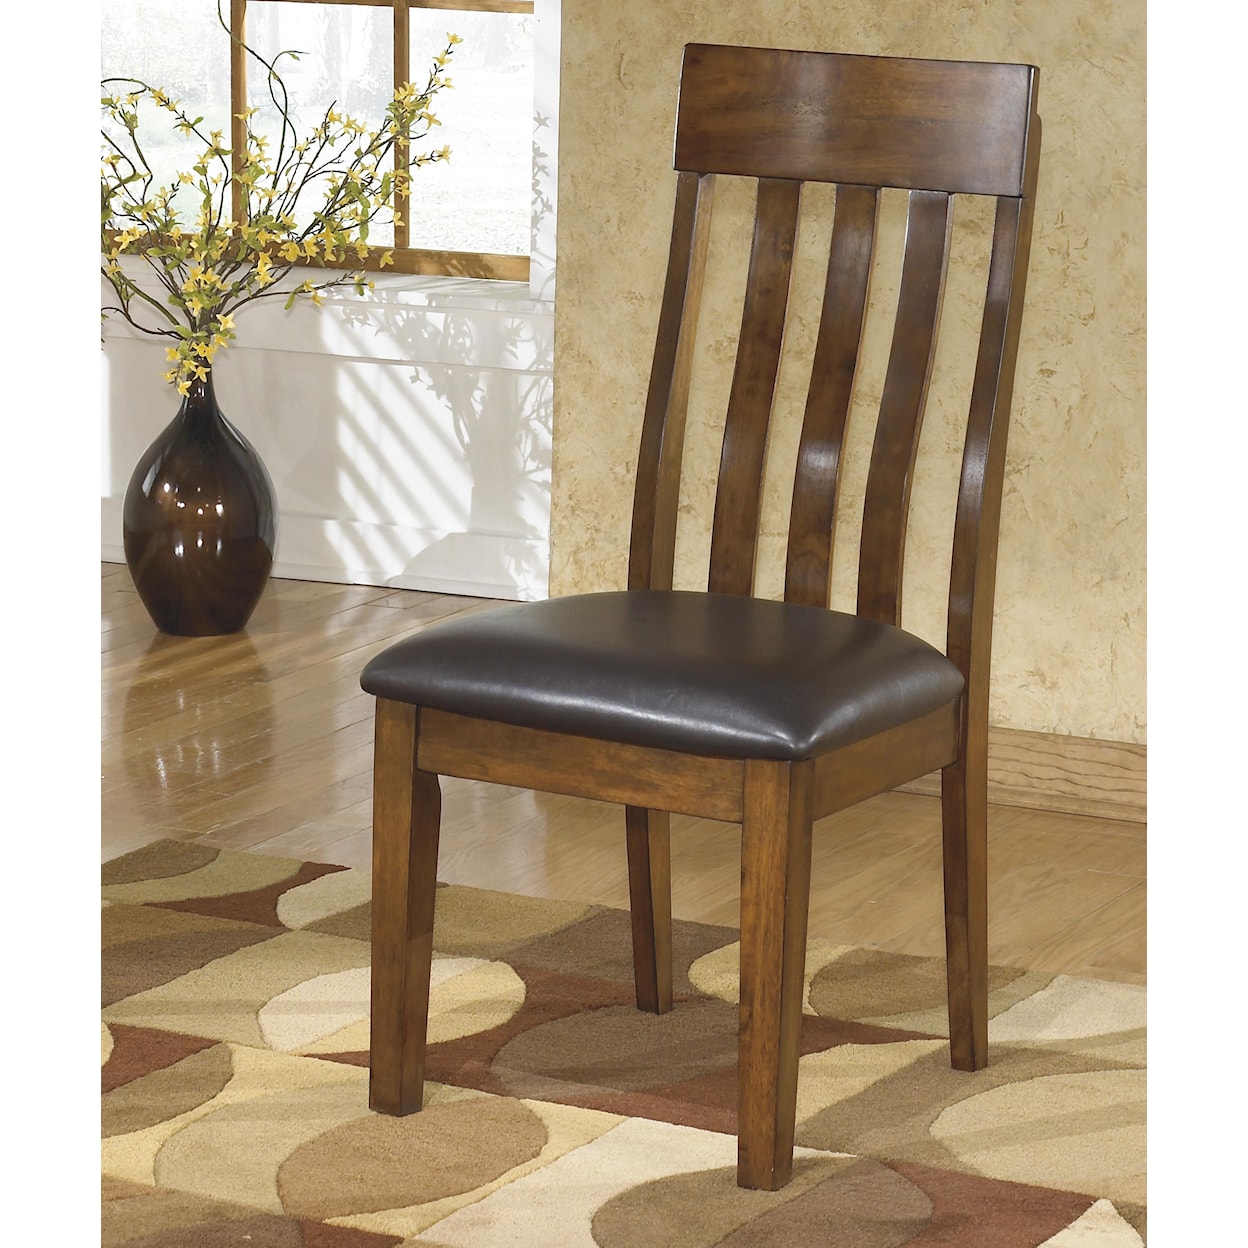 Signature Design by Ashley Ralene Upholstered Dining Side Chair